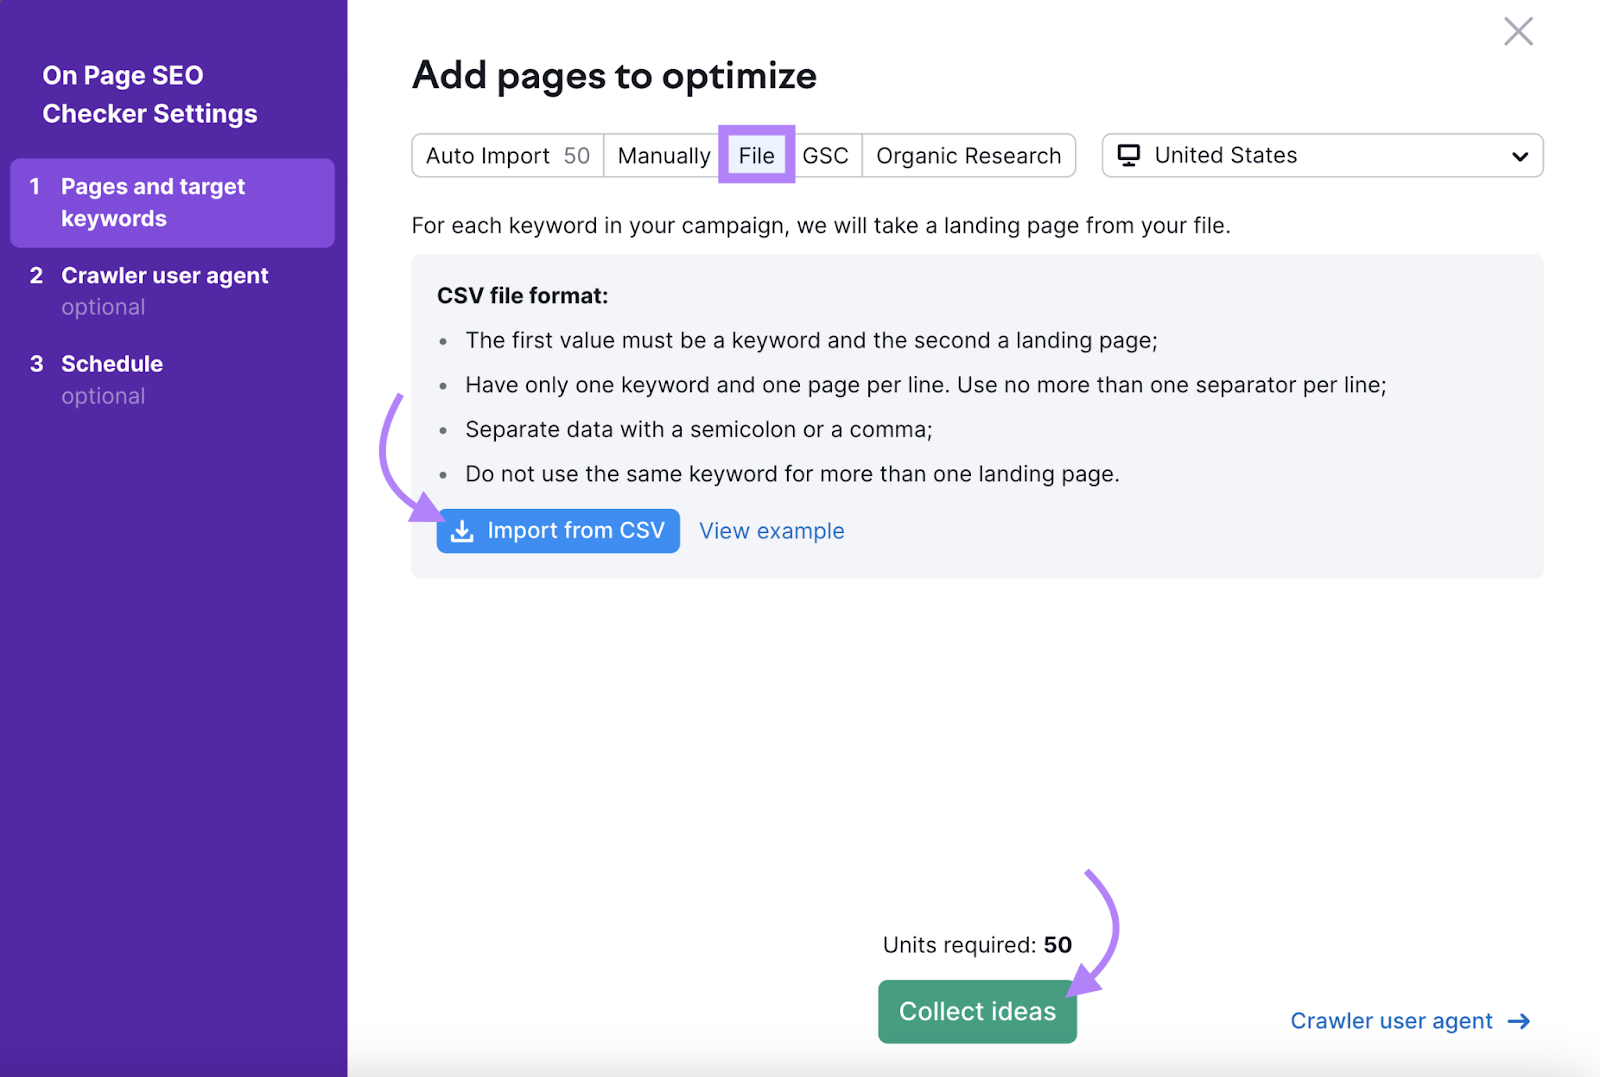 "Add pages to optimize" window in On Page SEO Checker tool settings